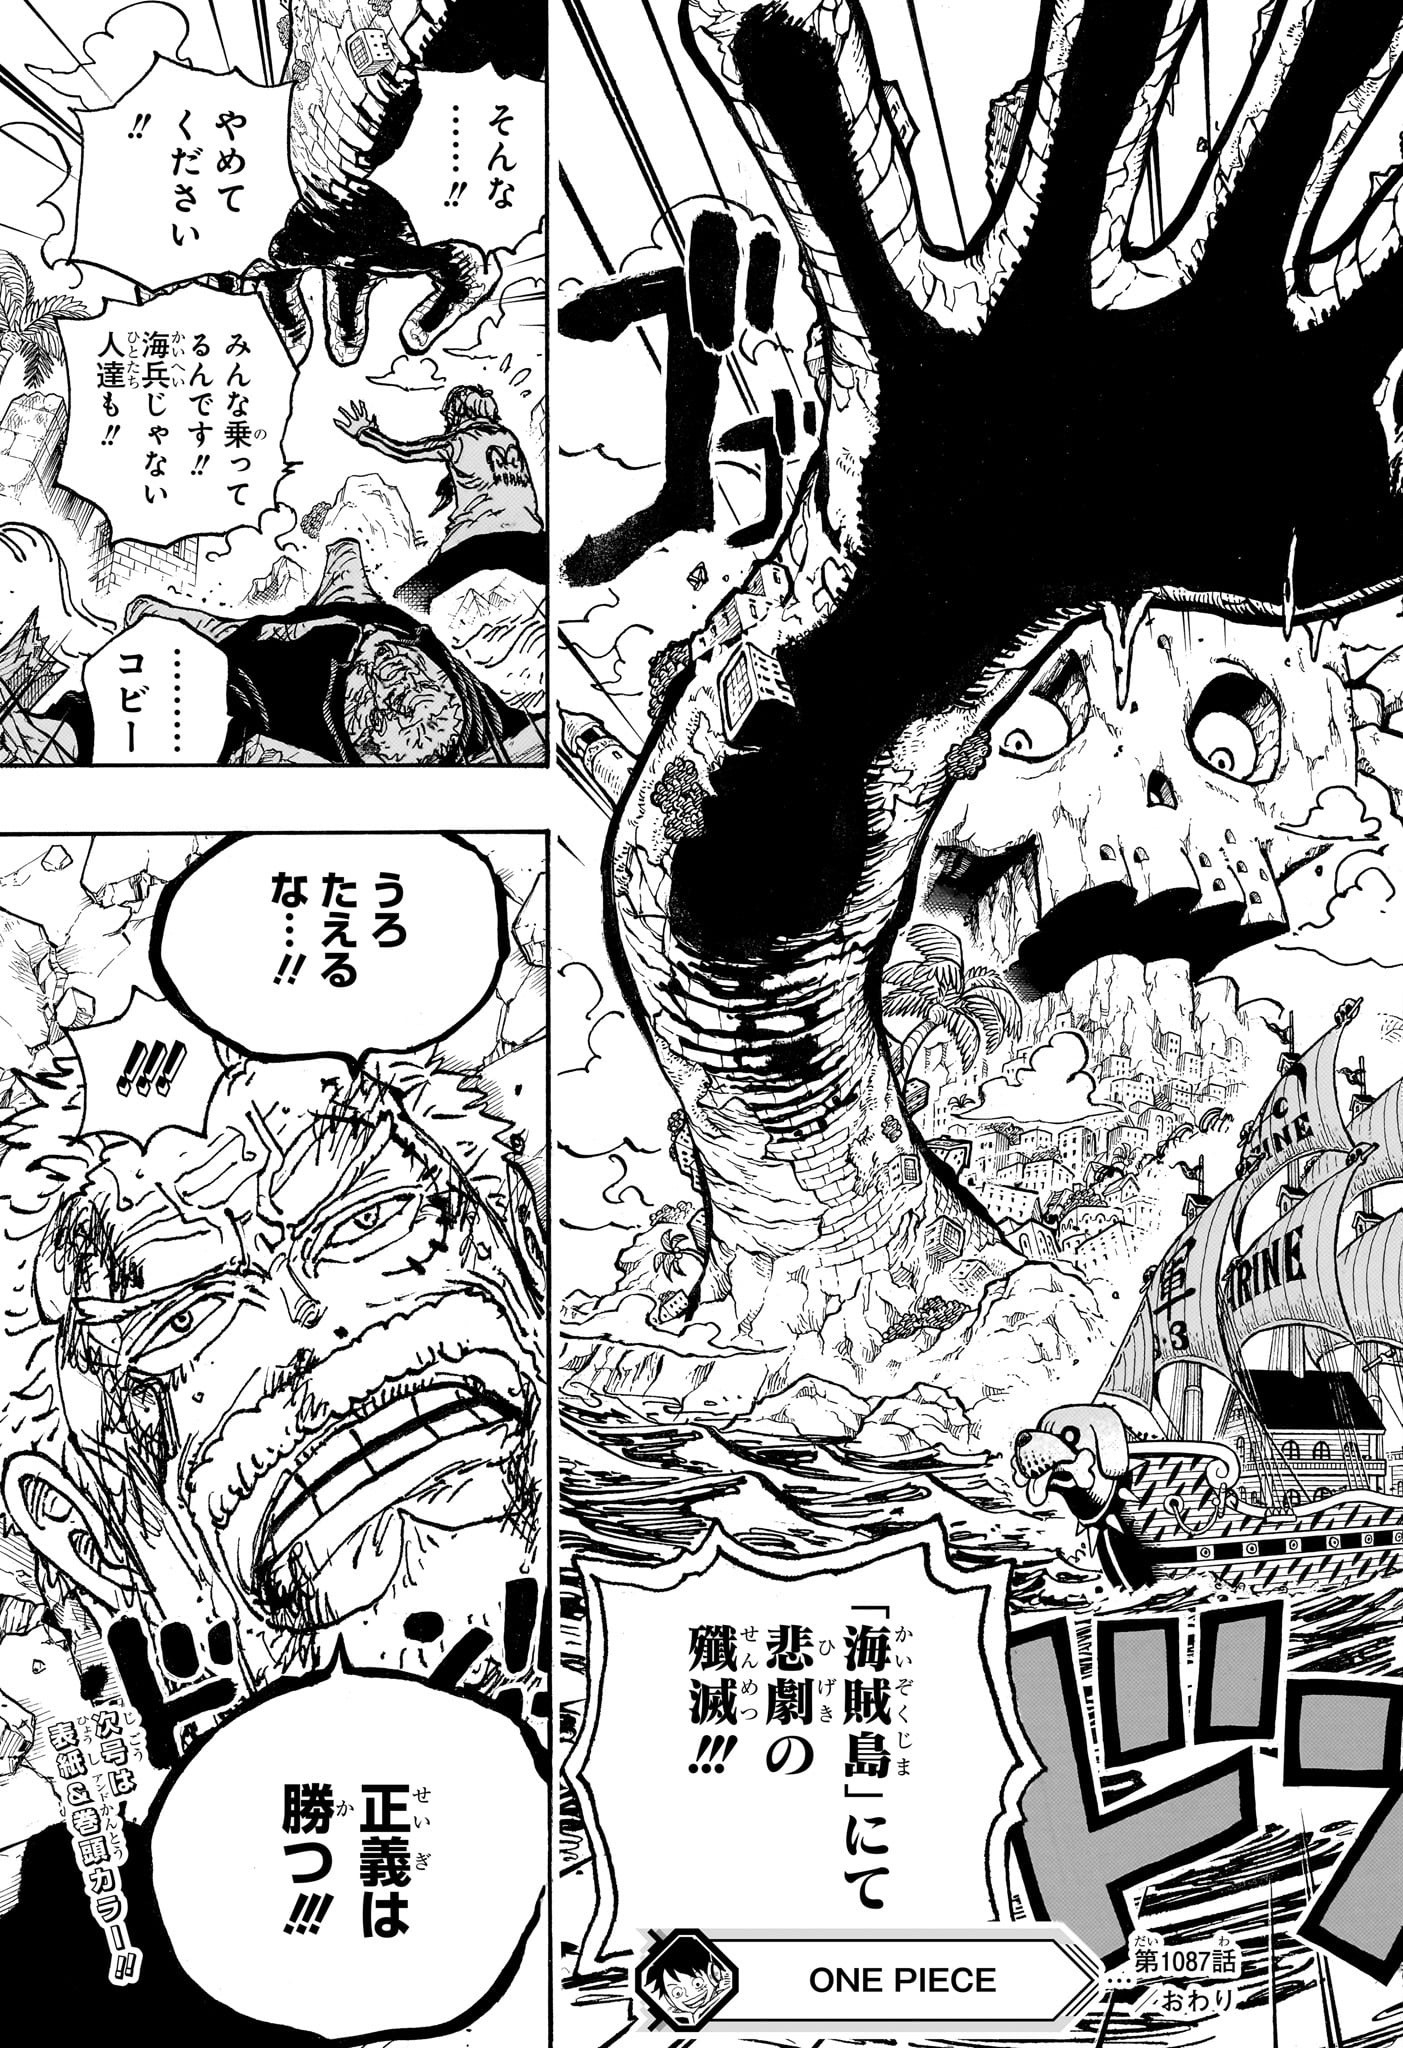 One Piece - Chapter 1087 - Page 15